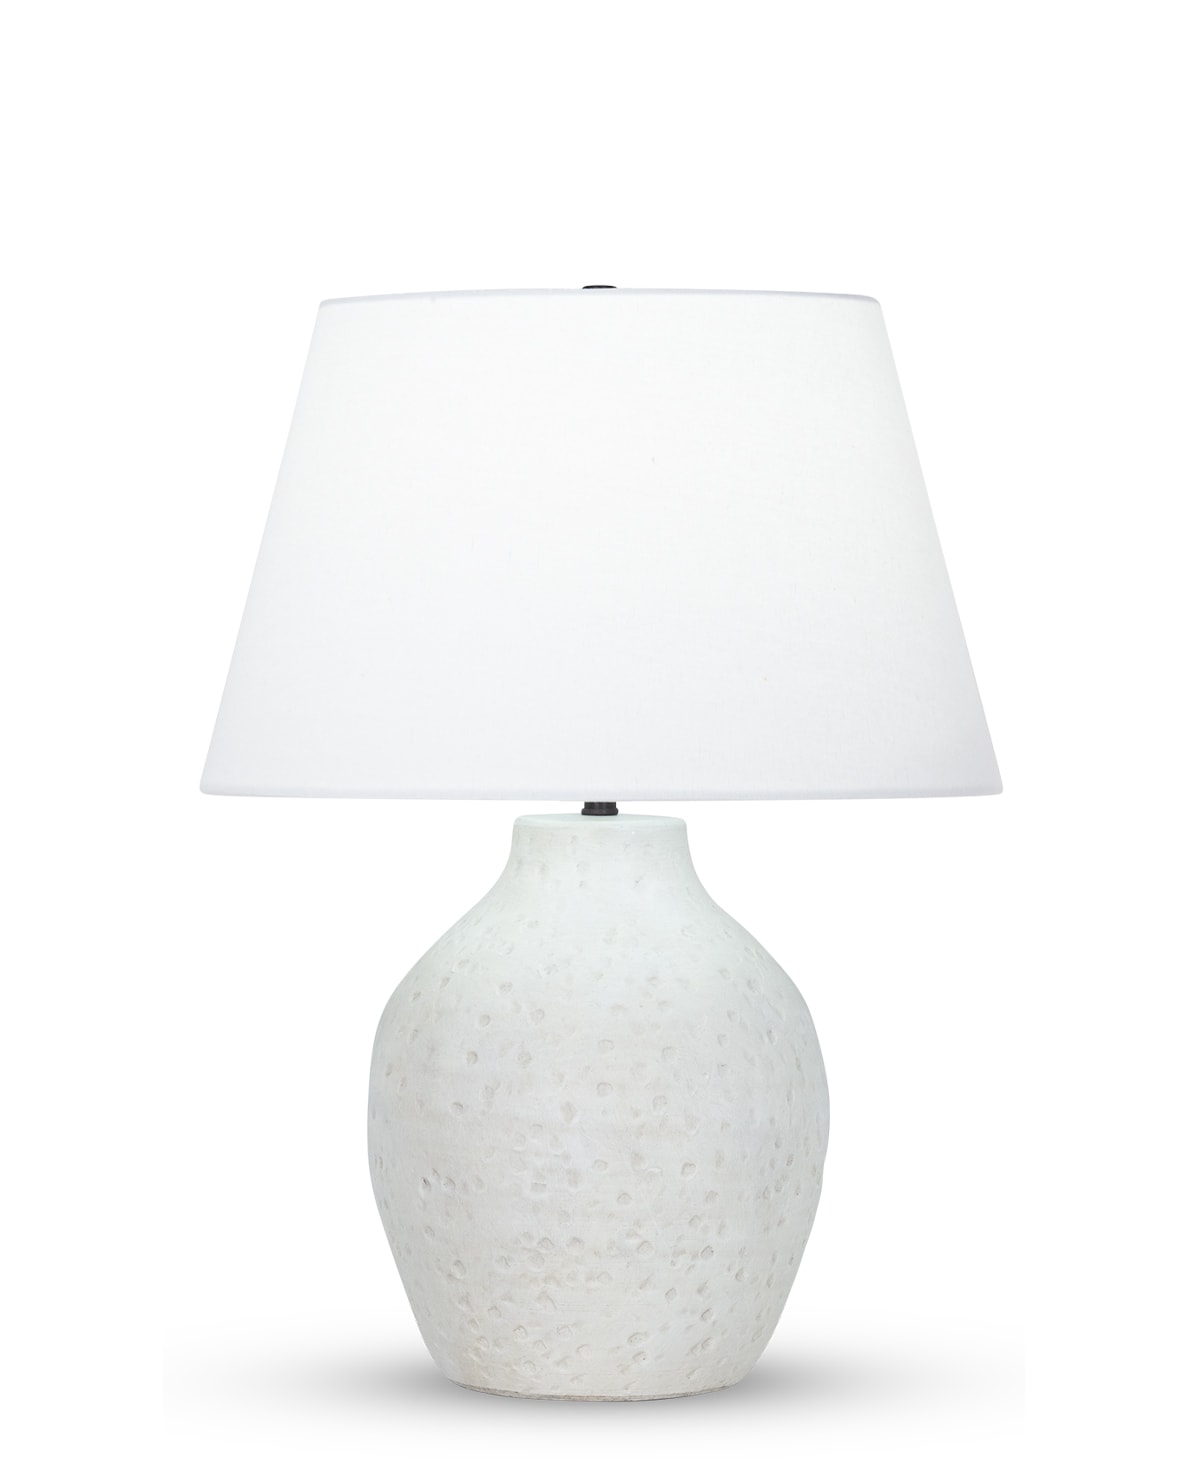 FlowDecor Luna Table Lamp in ceramic with off-white finish and off-white cotton tapered drum shade (# 4503)